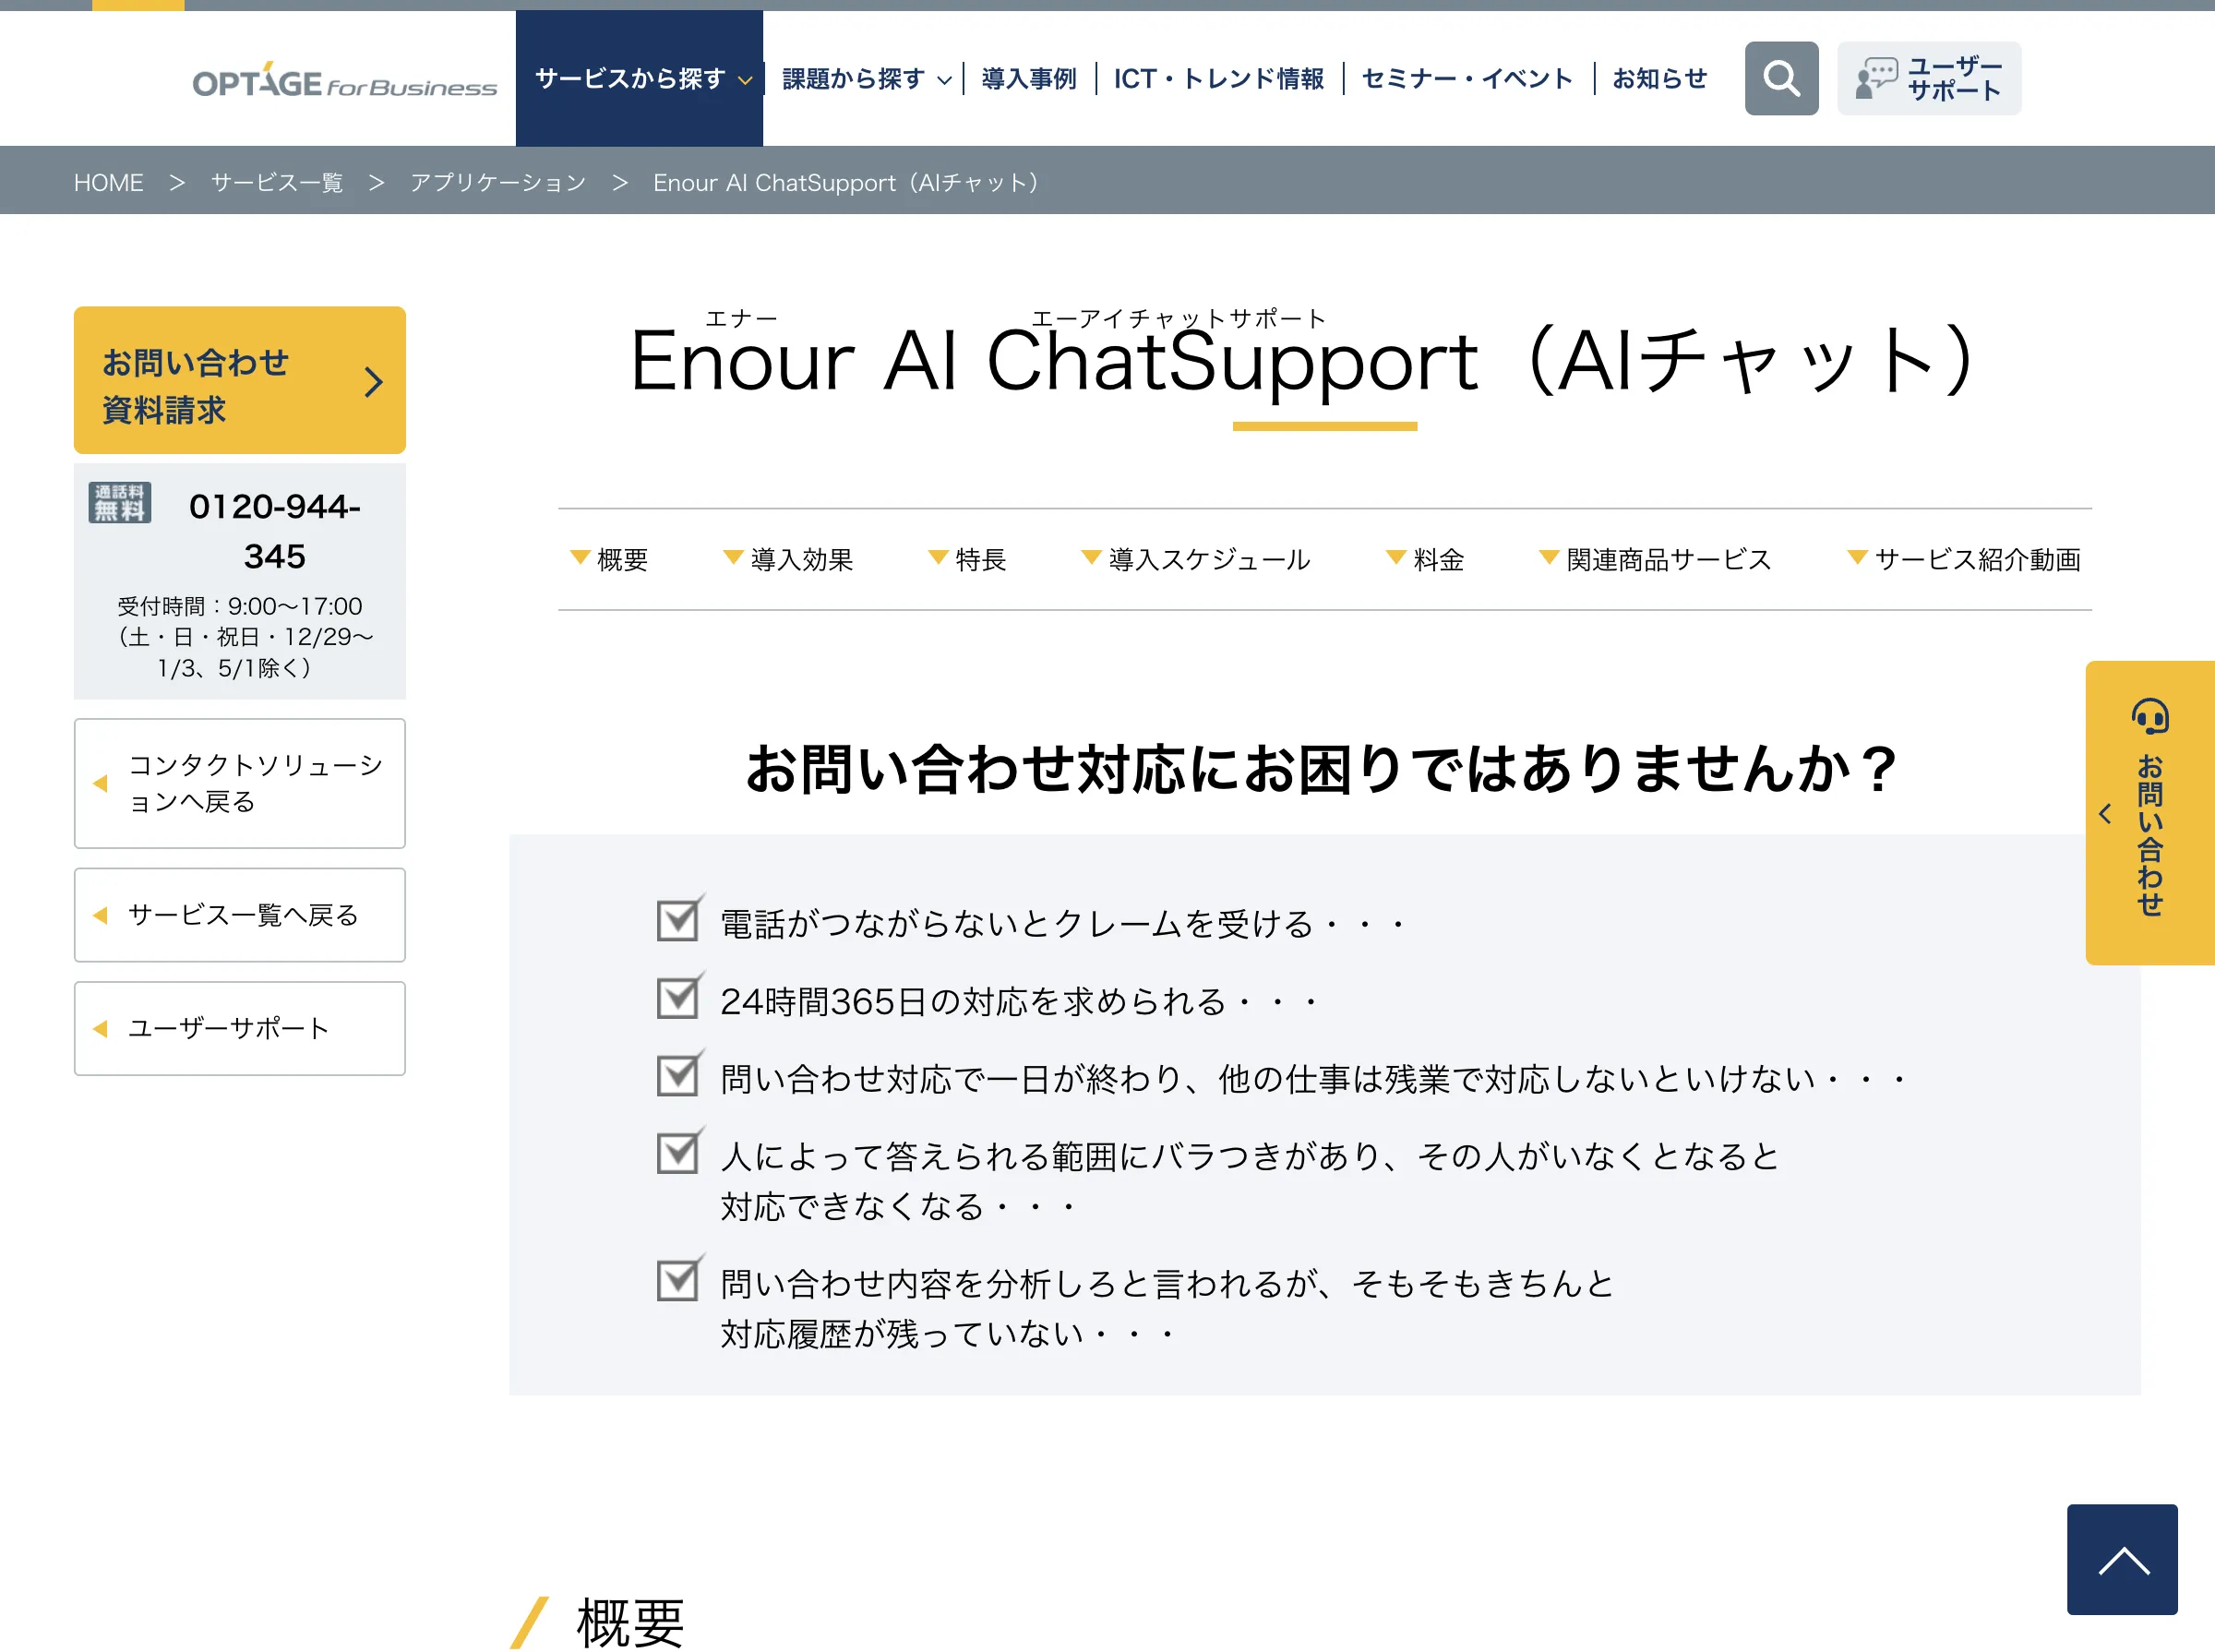 Enour AI ChatSupport(株式会社オプテージ)